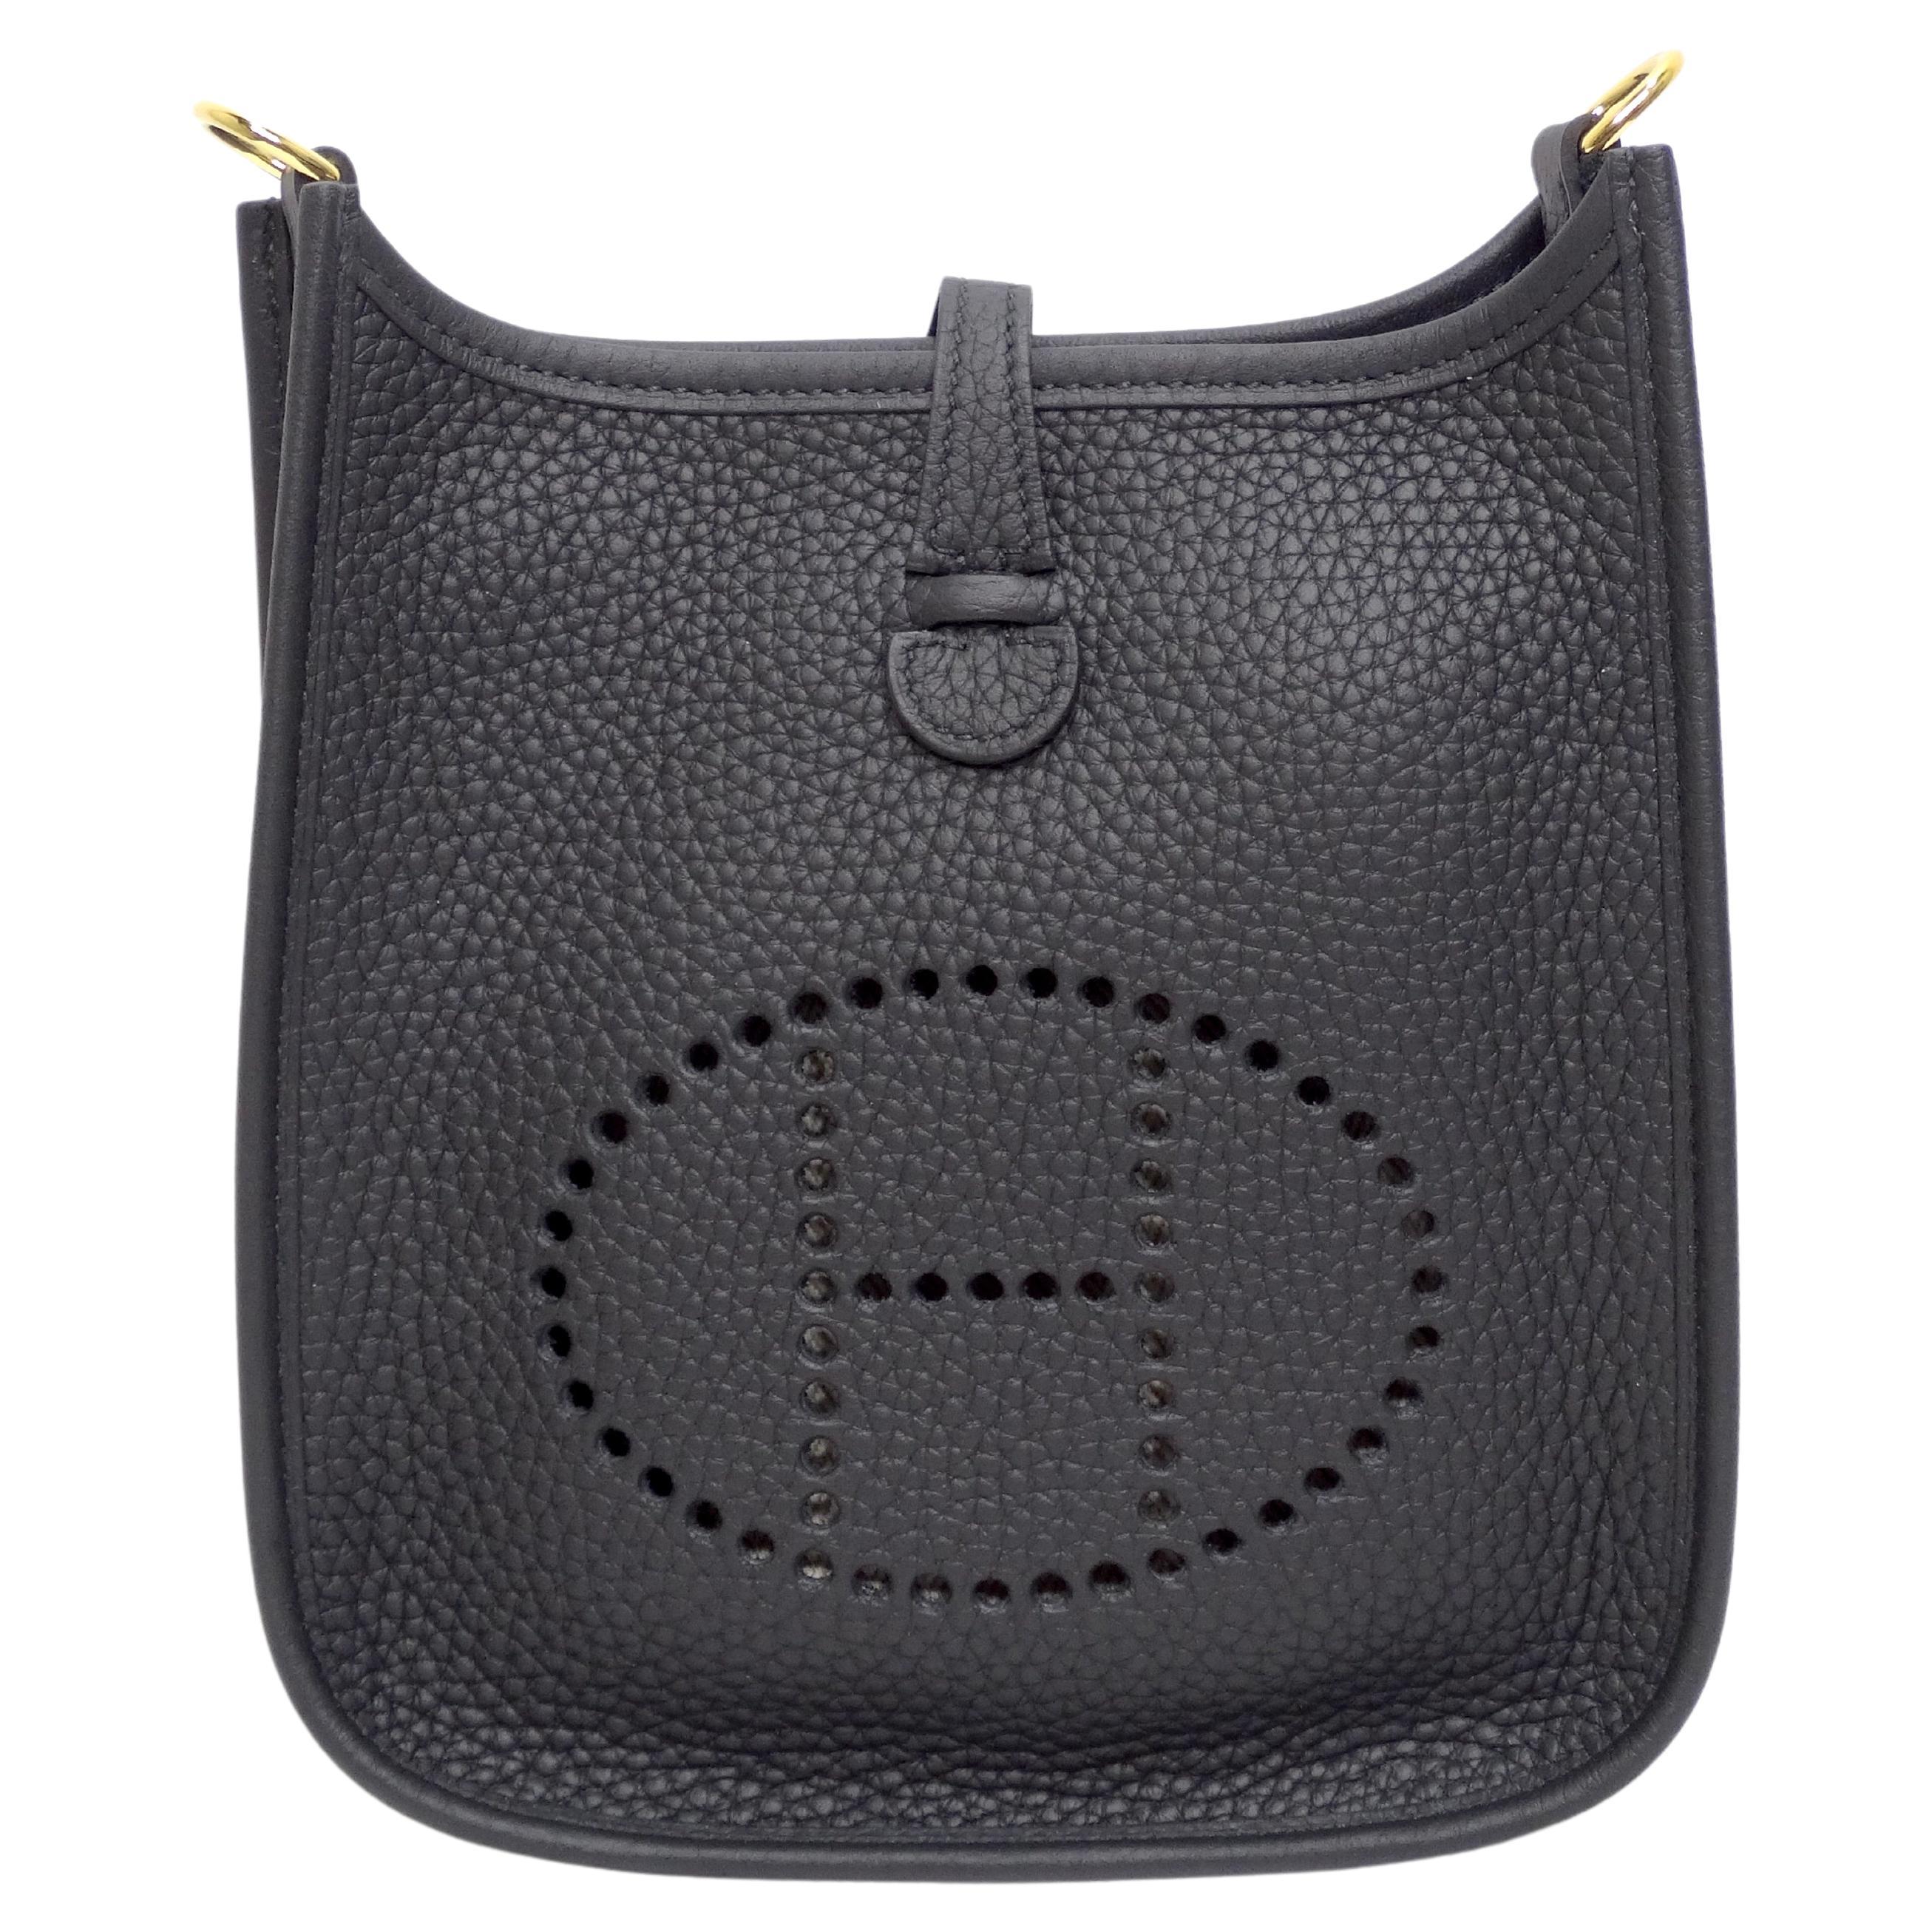 Your everyday bag has arrived! This is the adorable Hermès Evelyne TPM (Très Petit Modèle), also known as the Hermès Mini Evelyne or Evelyne 16 and is the smallest of the iconic Evelyne line. This chic and smart black shoulder bag measures